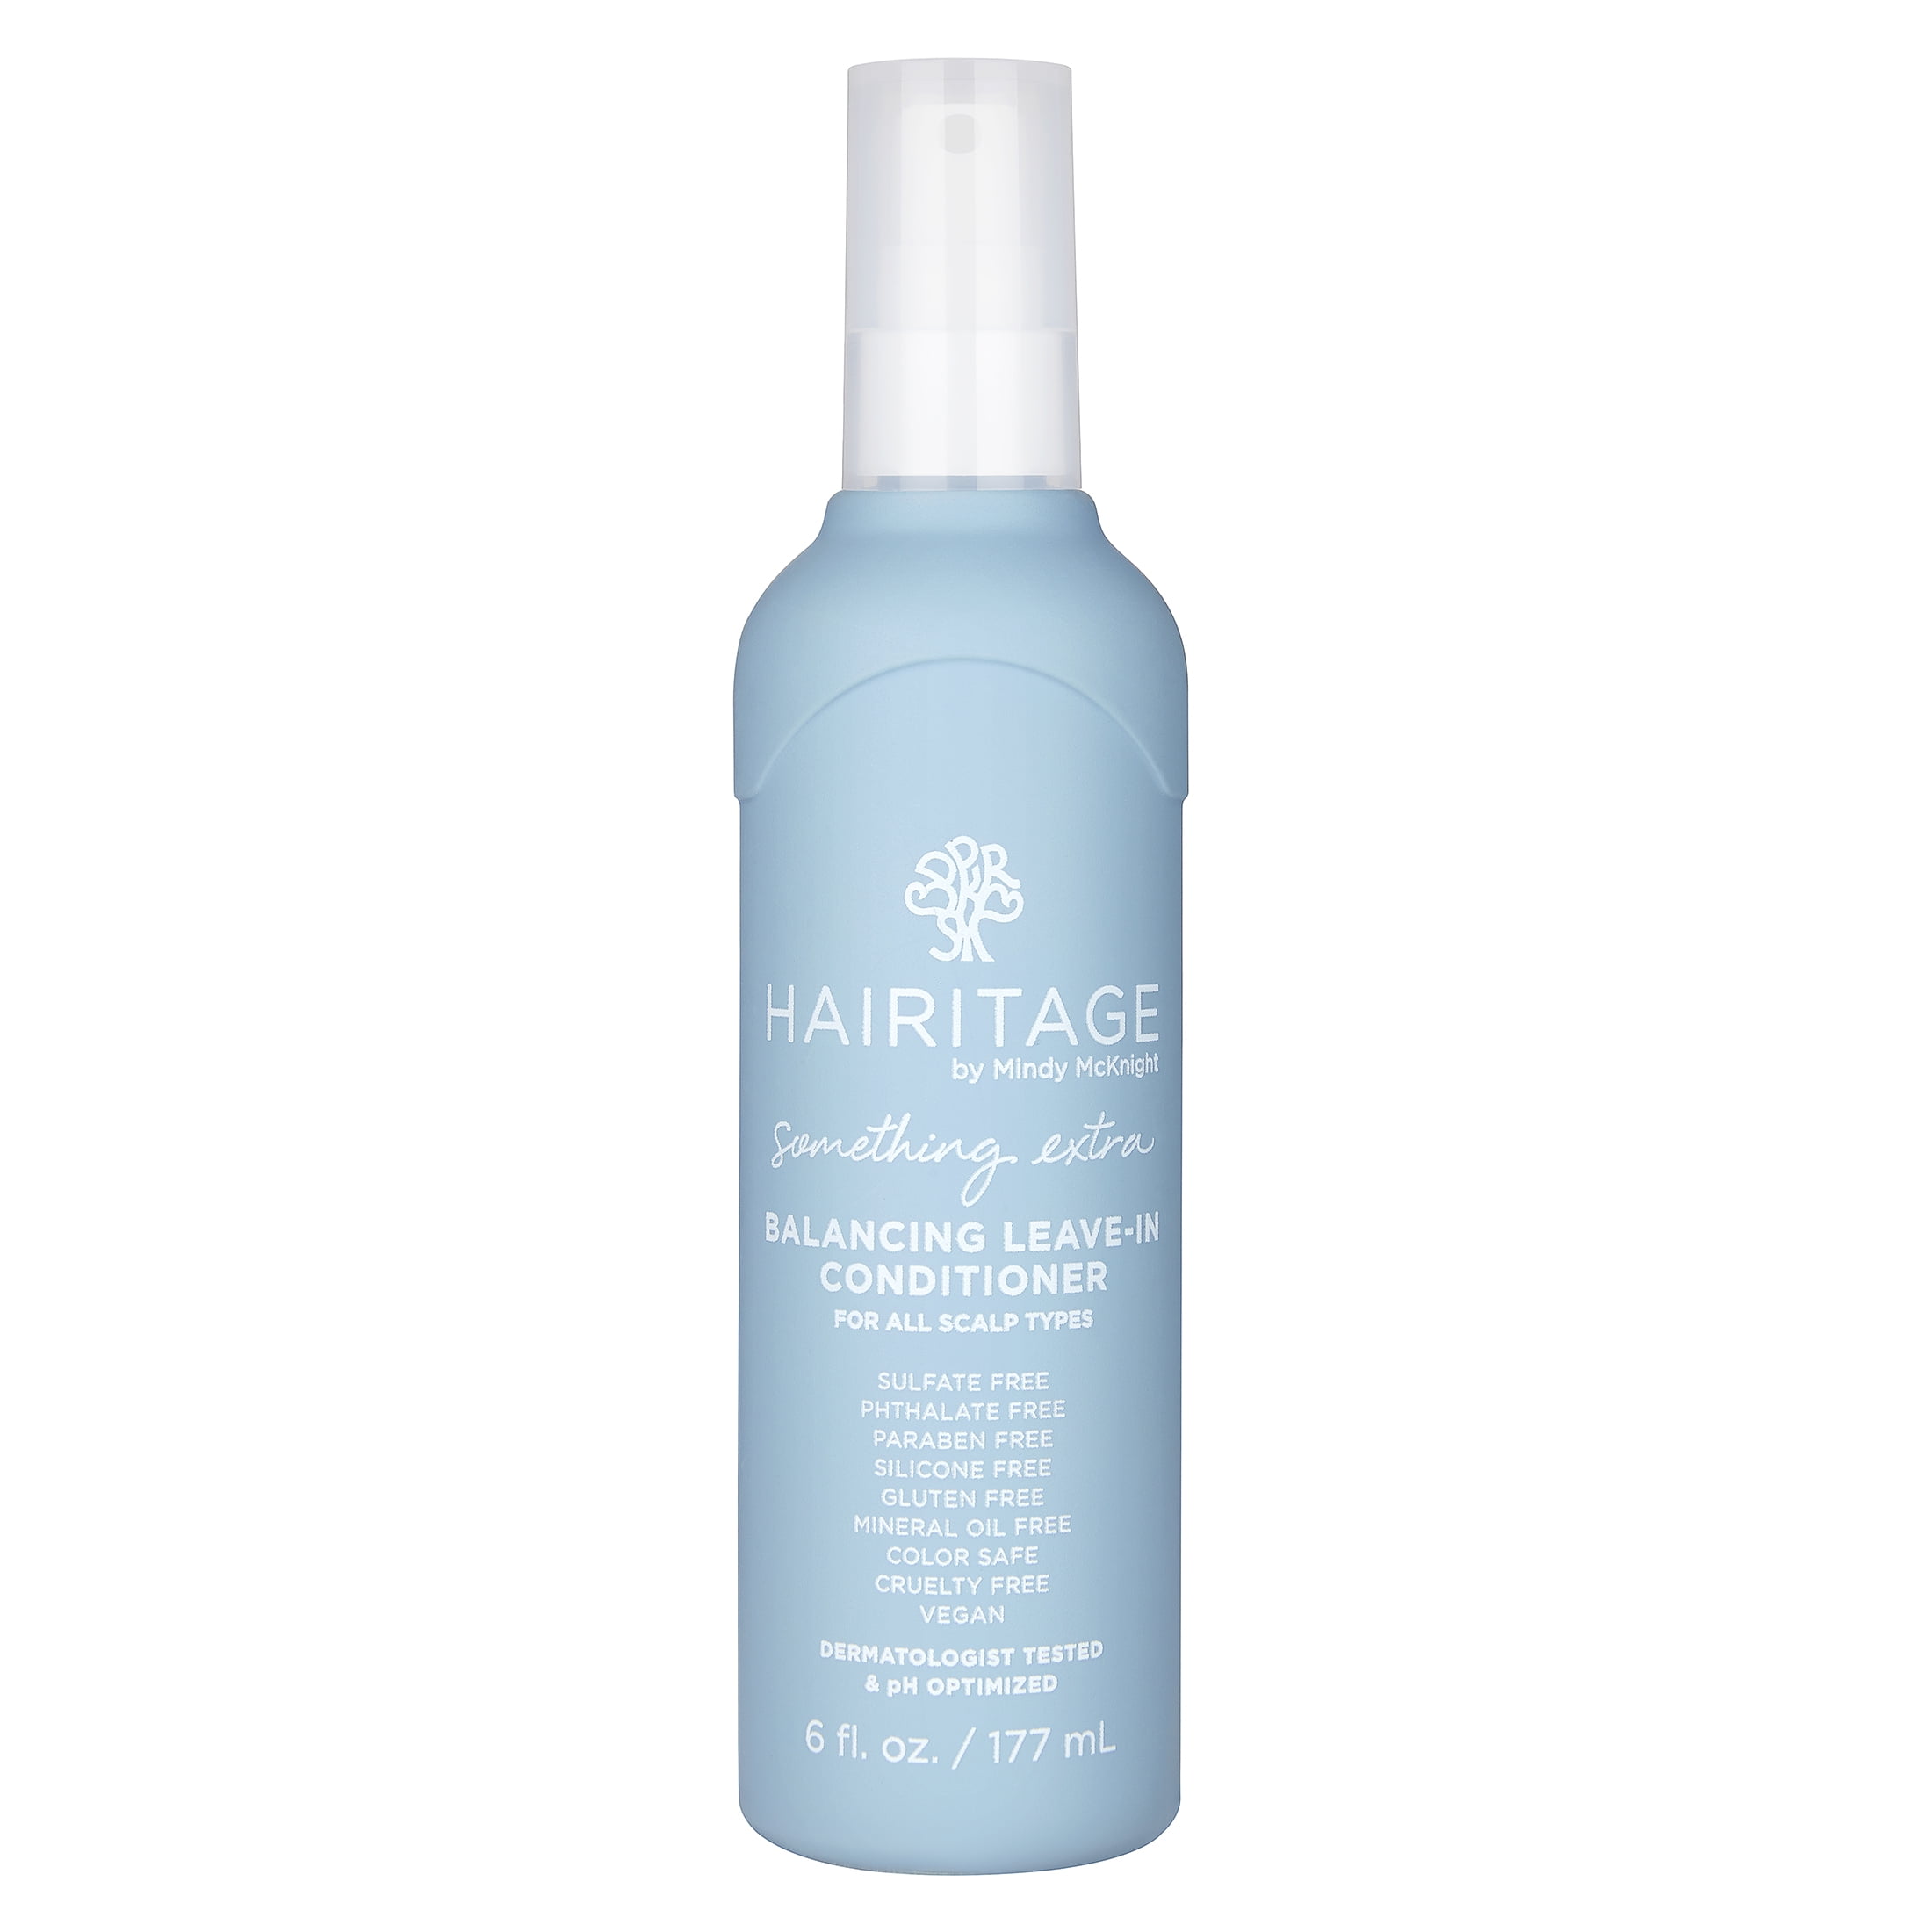 Hairitage Something Extra Balancing Leave-in Conditioner with Aloe Vera, 6 fl oz